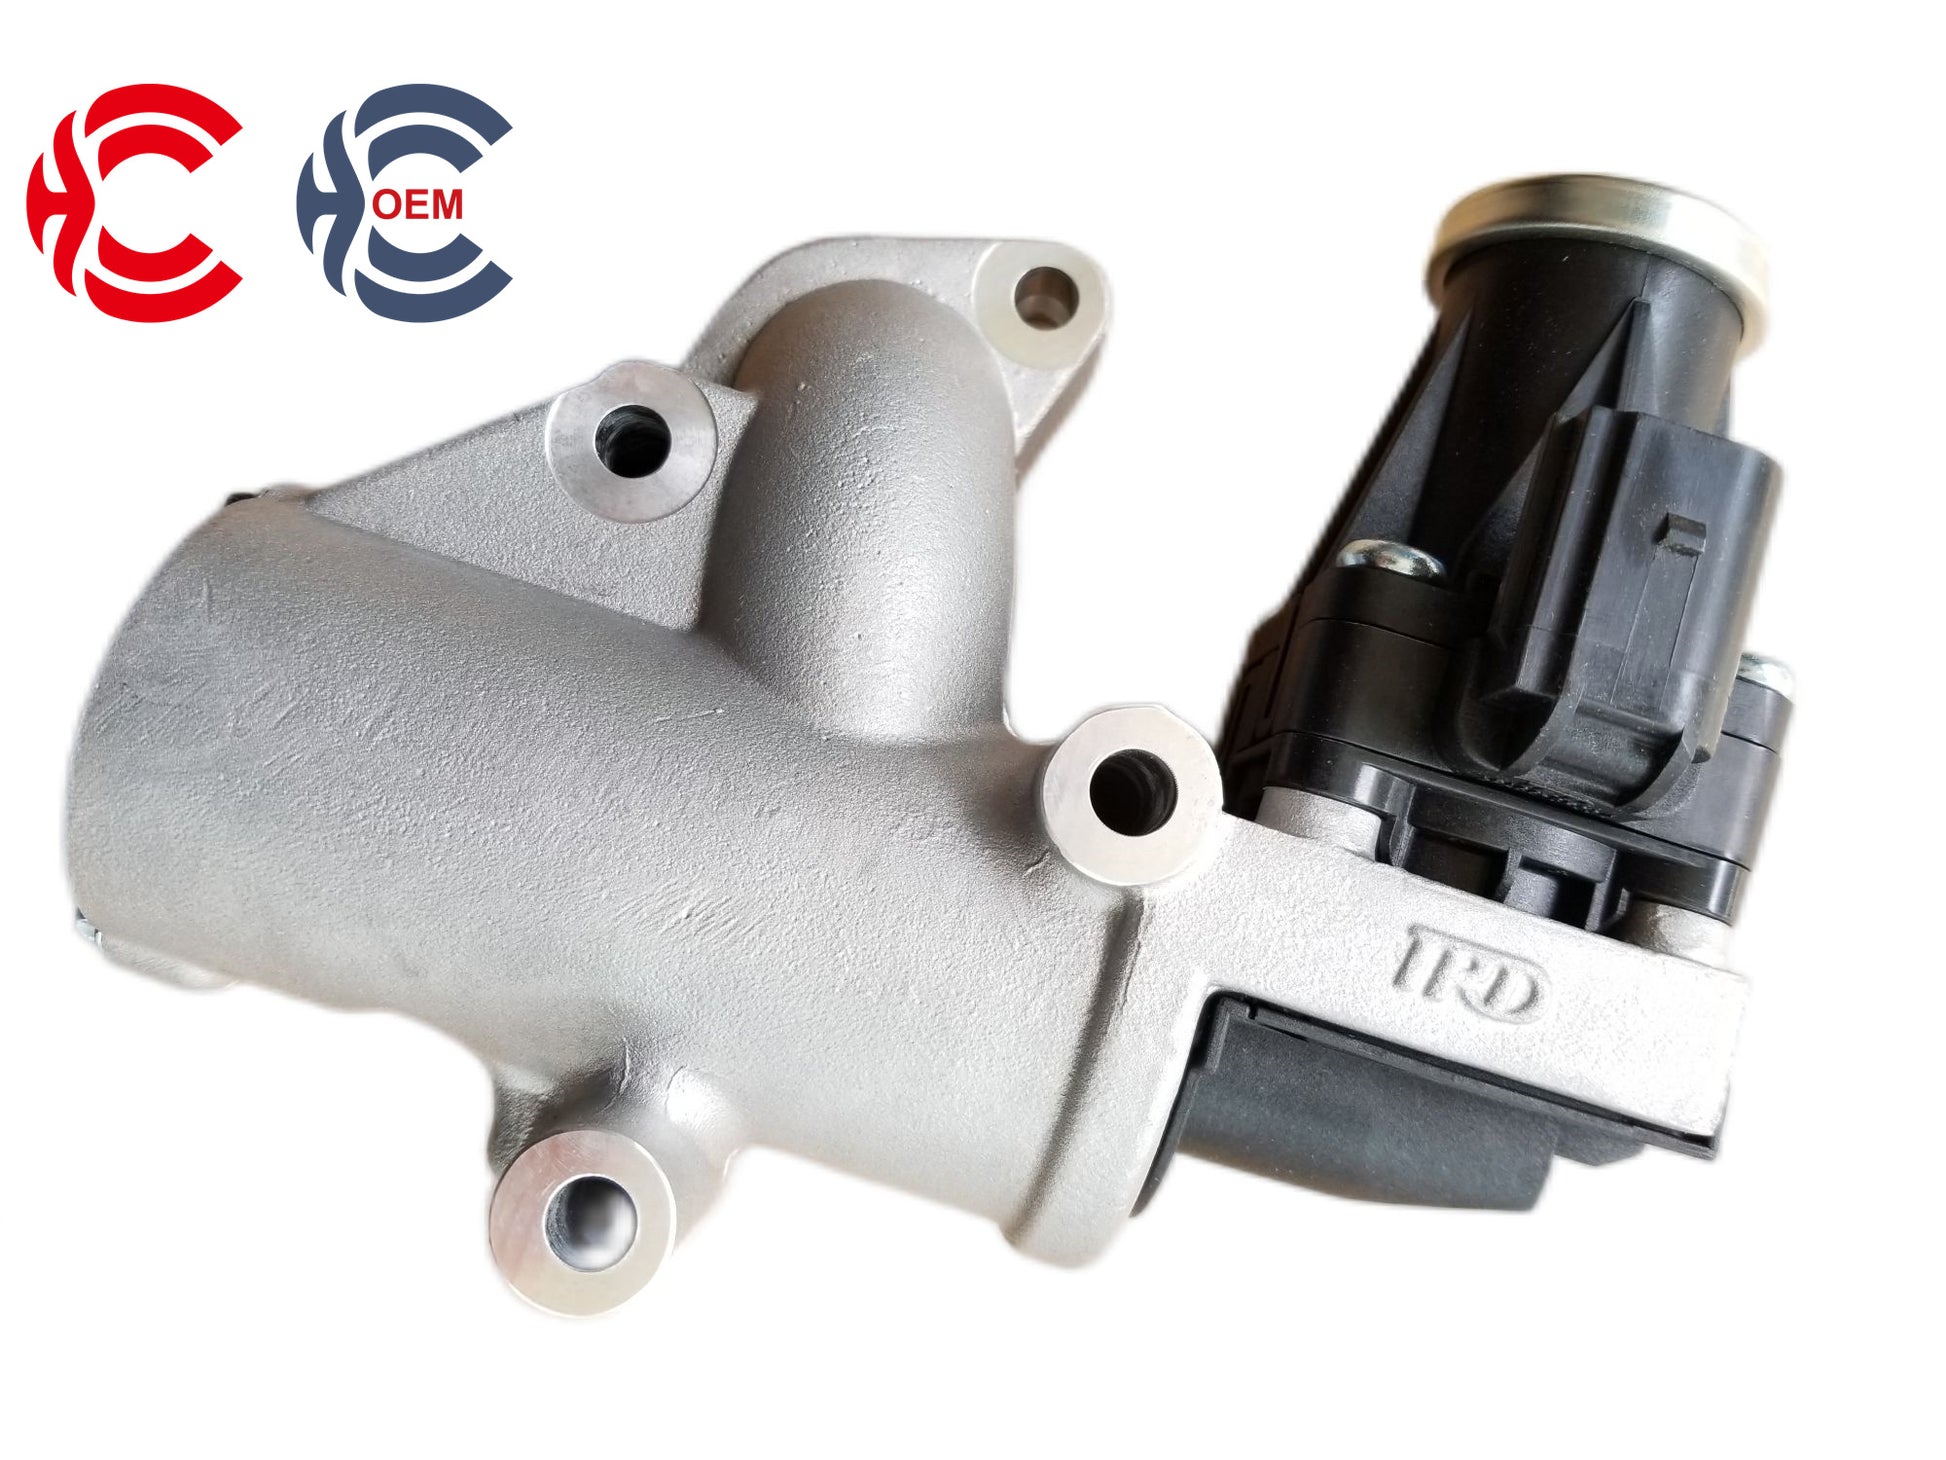 OEM: CN3-9D475-ADMaterial: ABS MetalColor: black silver goldenOrigin: Made in ChinaWeight: 1000gPacking List: 1* Exhaust Gas Recirculation Valve More ServiceWe can provide OEM Manufacturing serviceWe can Be your one-step solution for Auto PartsWe can provide technical scheme for you Feel Free to Contact Us, We will get back to you as soon as possible.